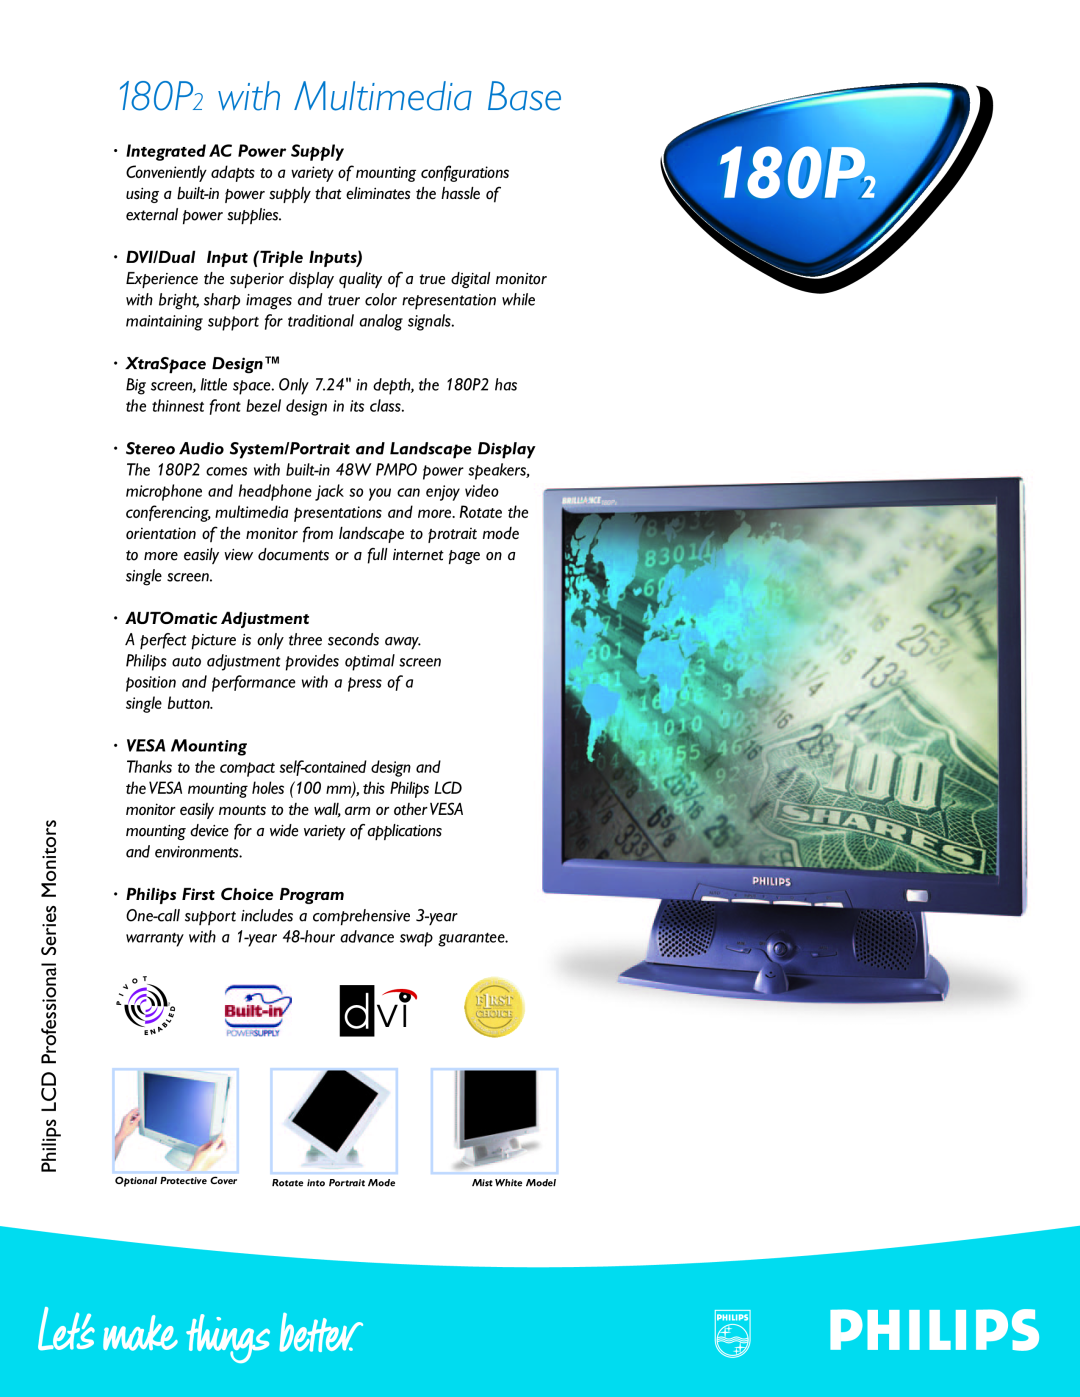 Philips warranty 180P2 with Multimedia Base, Philips LCD Professional Series Monitors, · Integrated AC Power Supply 